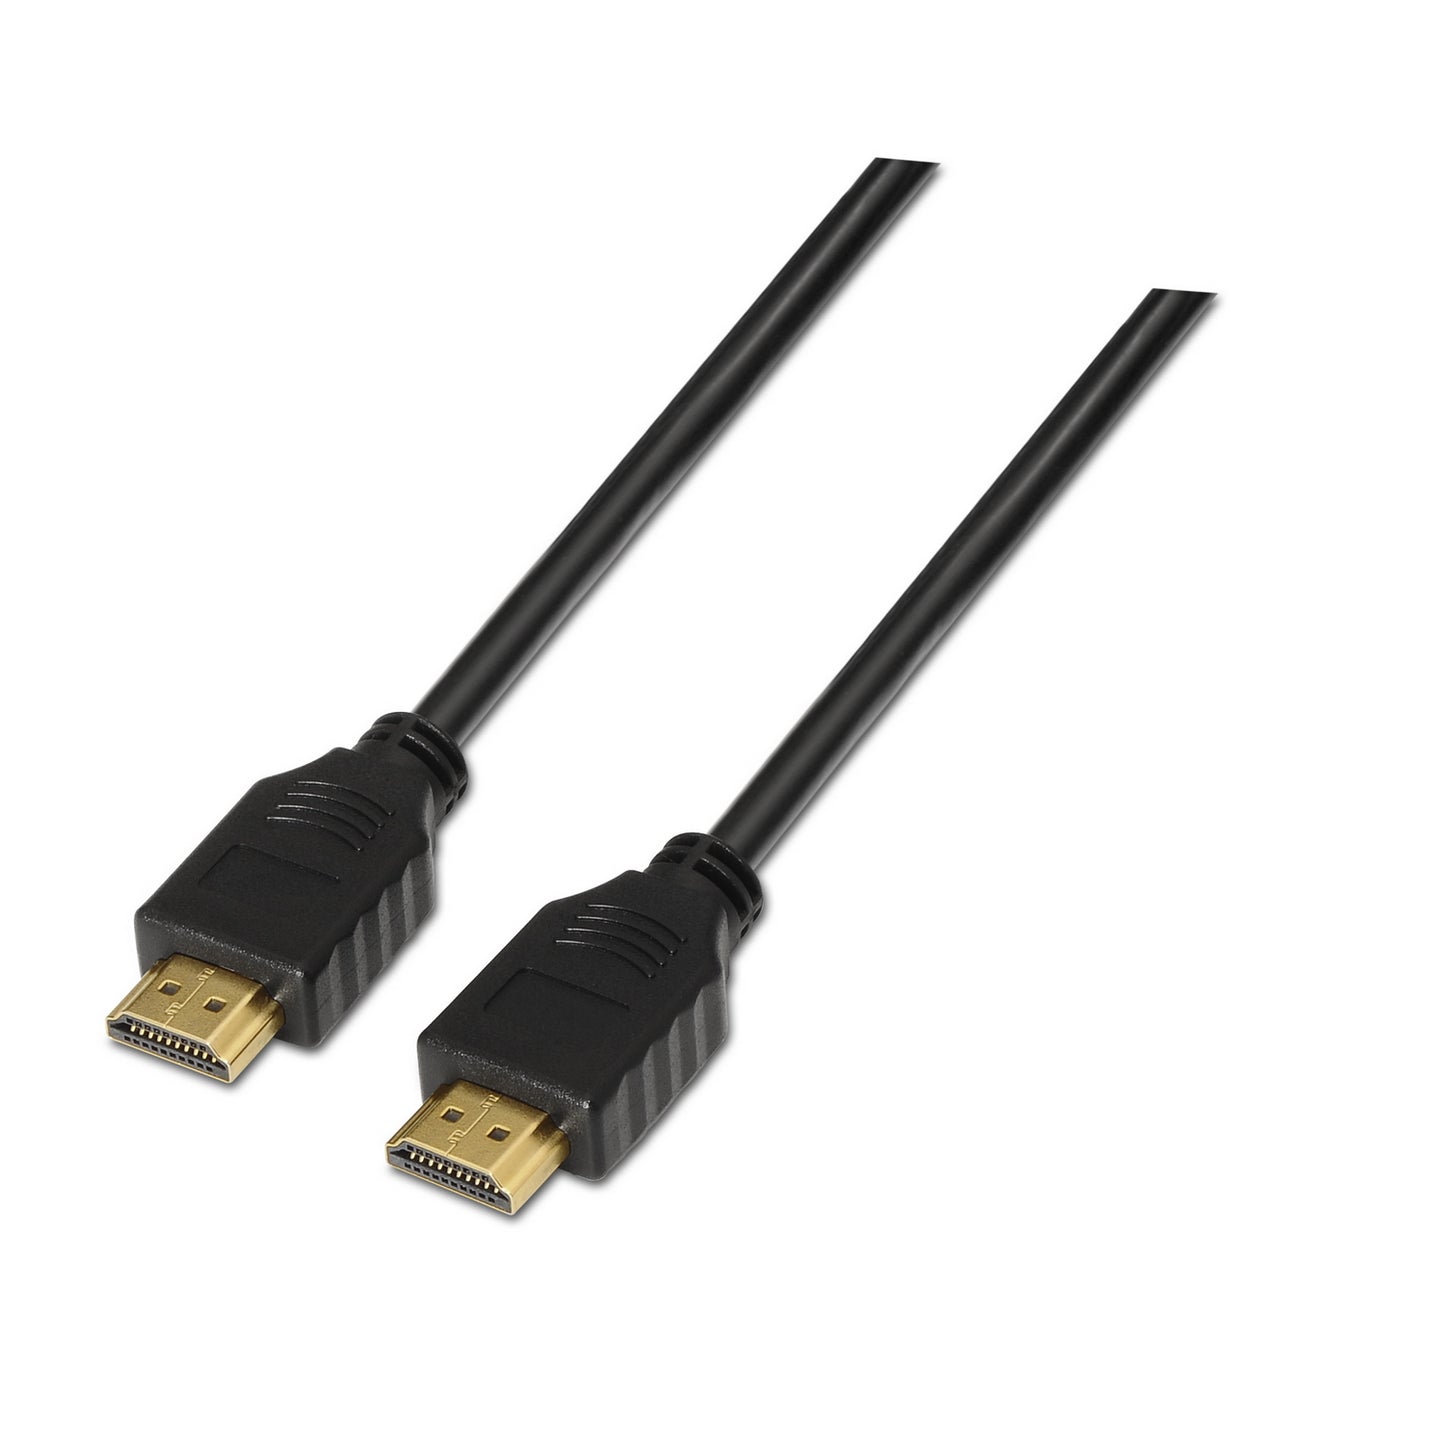 HIGH SPEED HDMI CABLE MALE TO MALE 3M